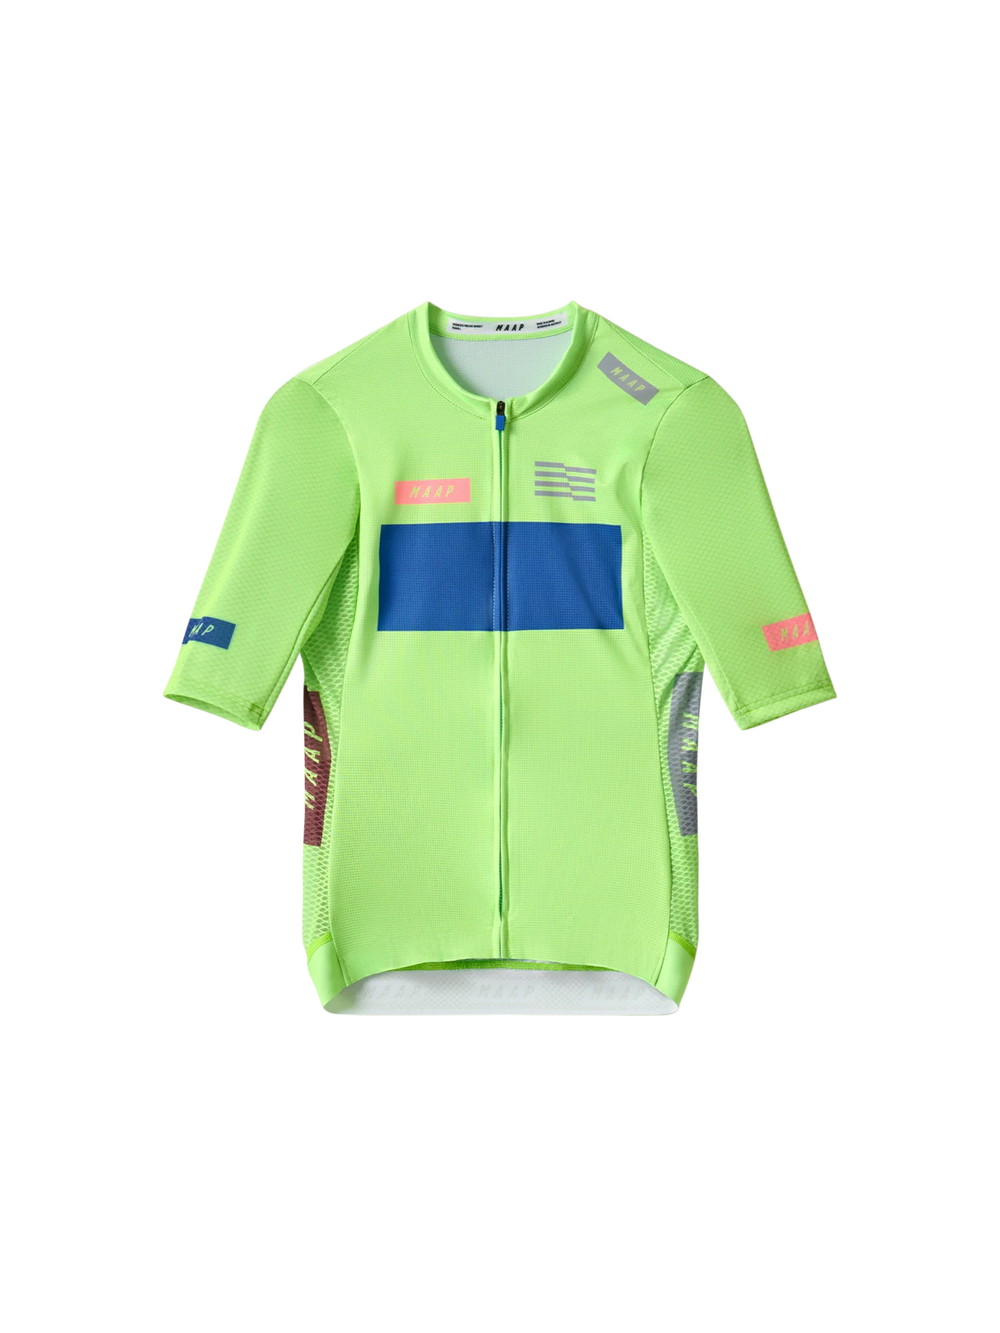 Product Image for Women's System Pro Air Jersey